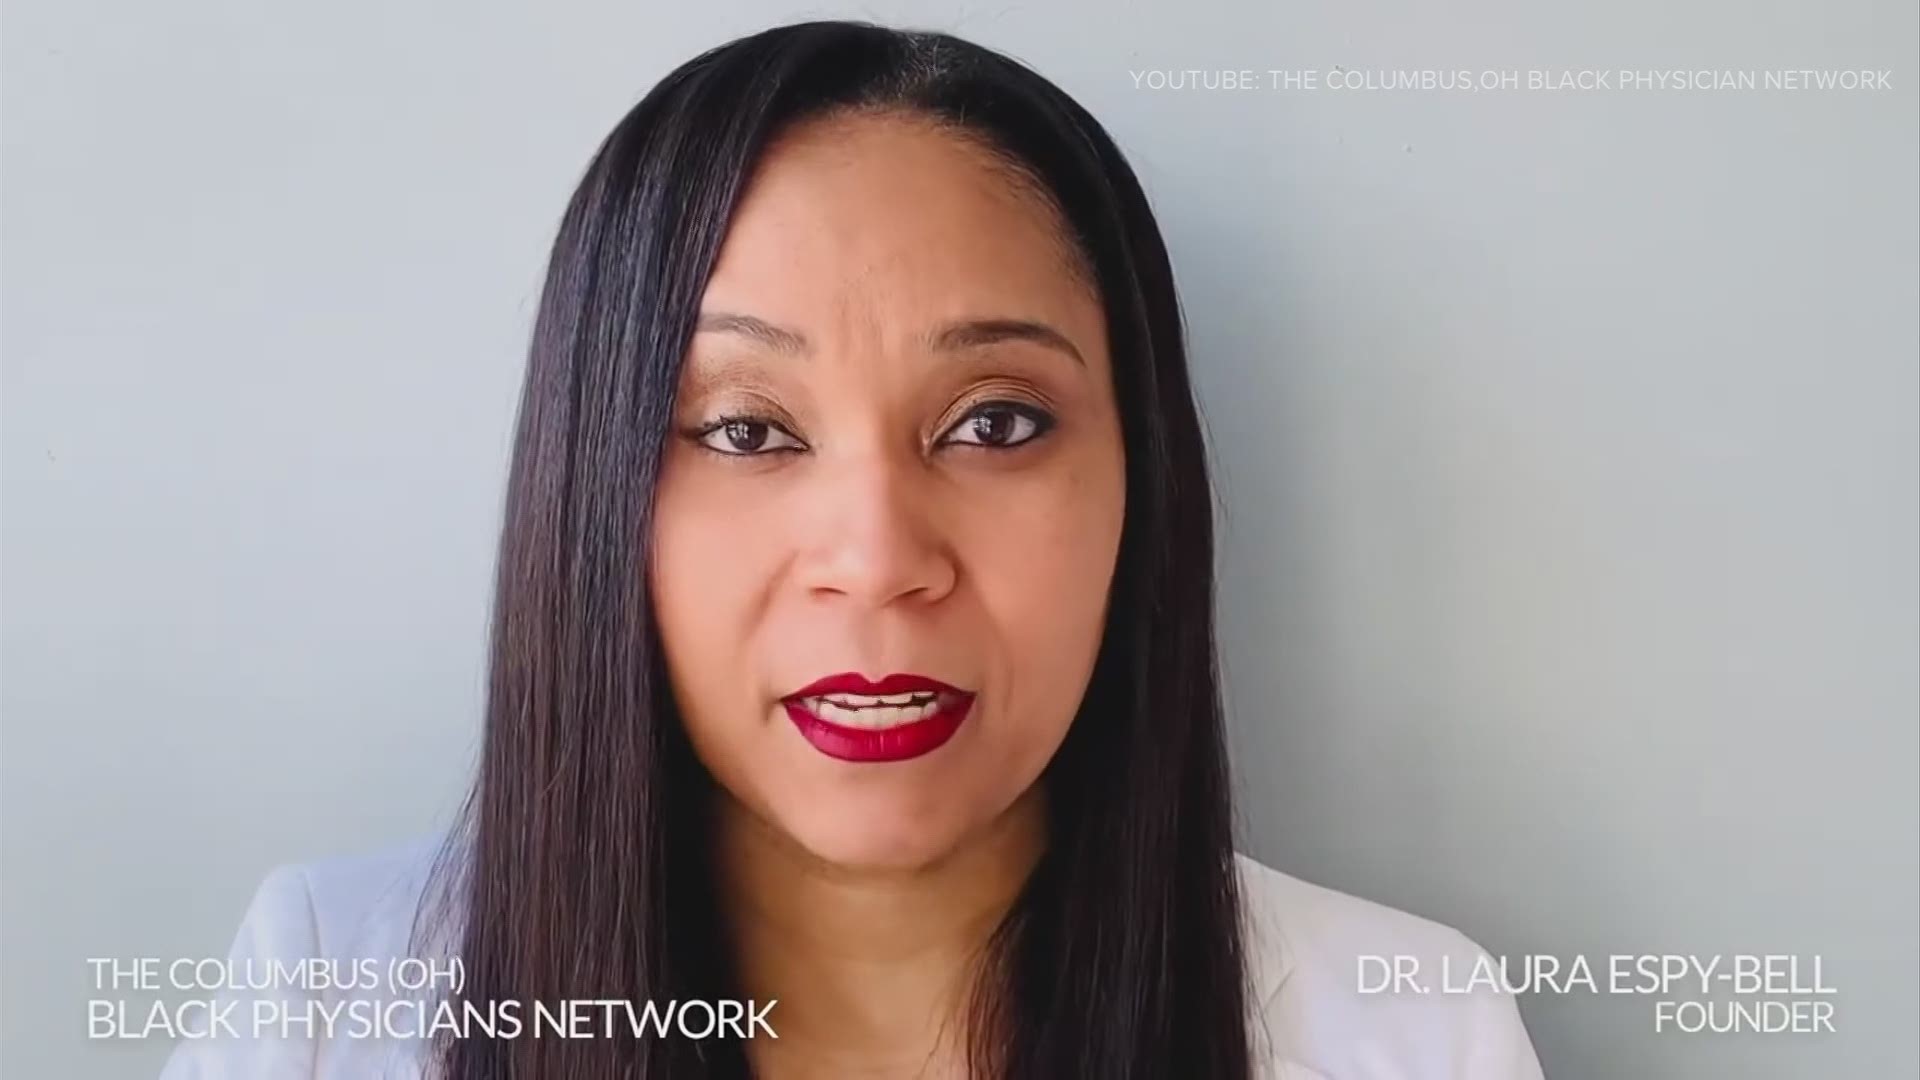 A new and direct message is going out to communities of color from medical experts who look like them.